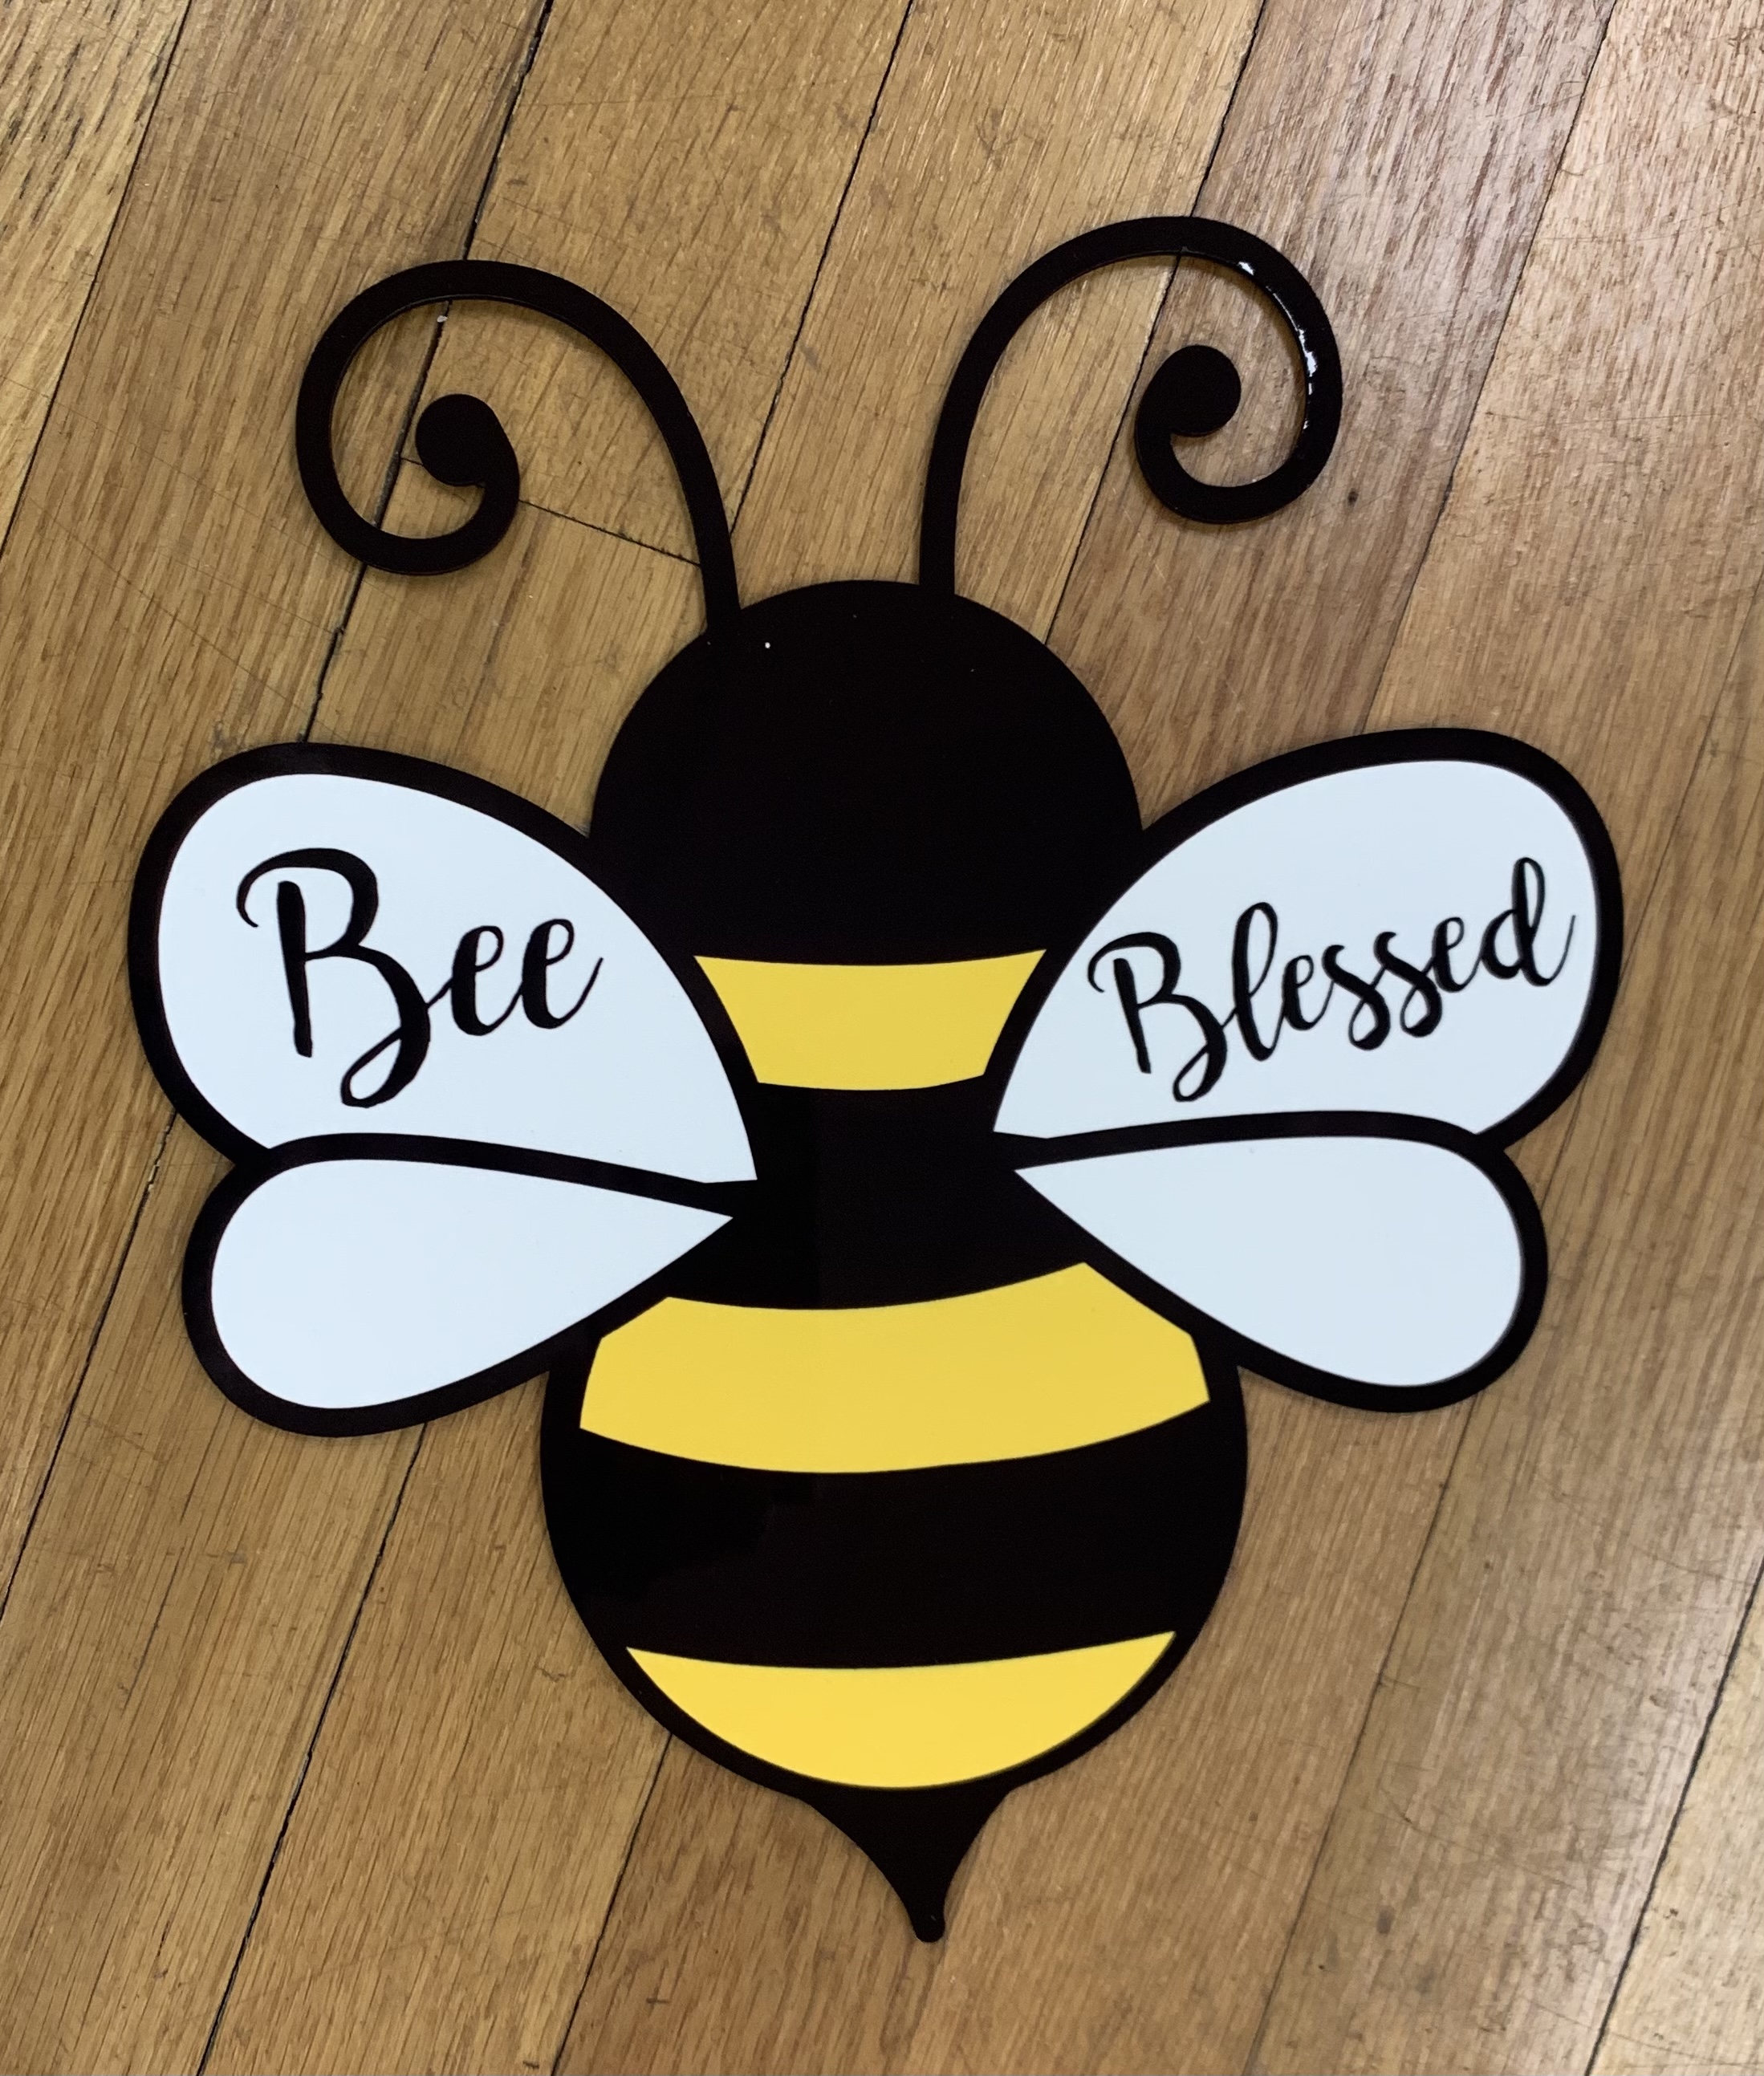 Bee Blessed made with sublimation printing